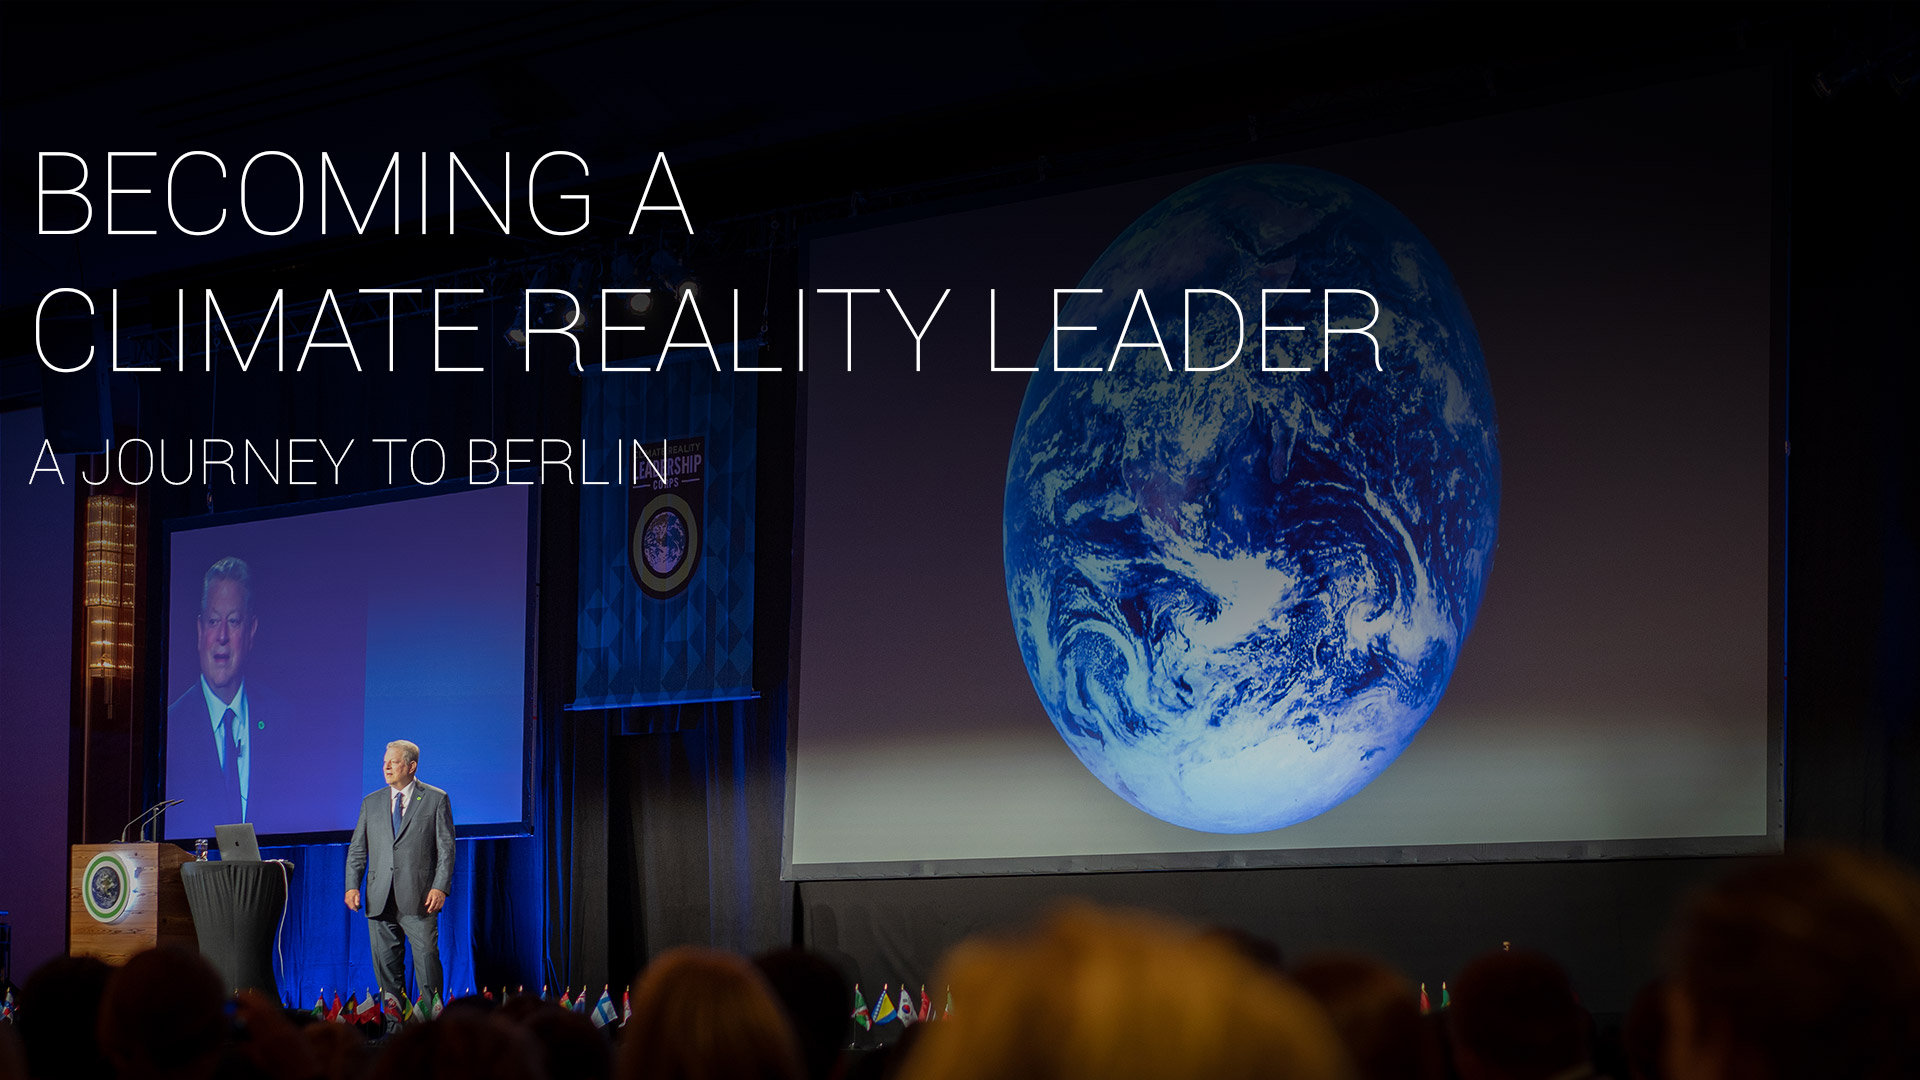 Becoming a Climate Reality Leader - a journey to Berlin